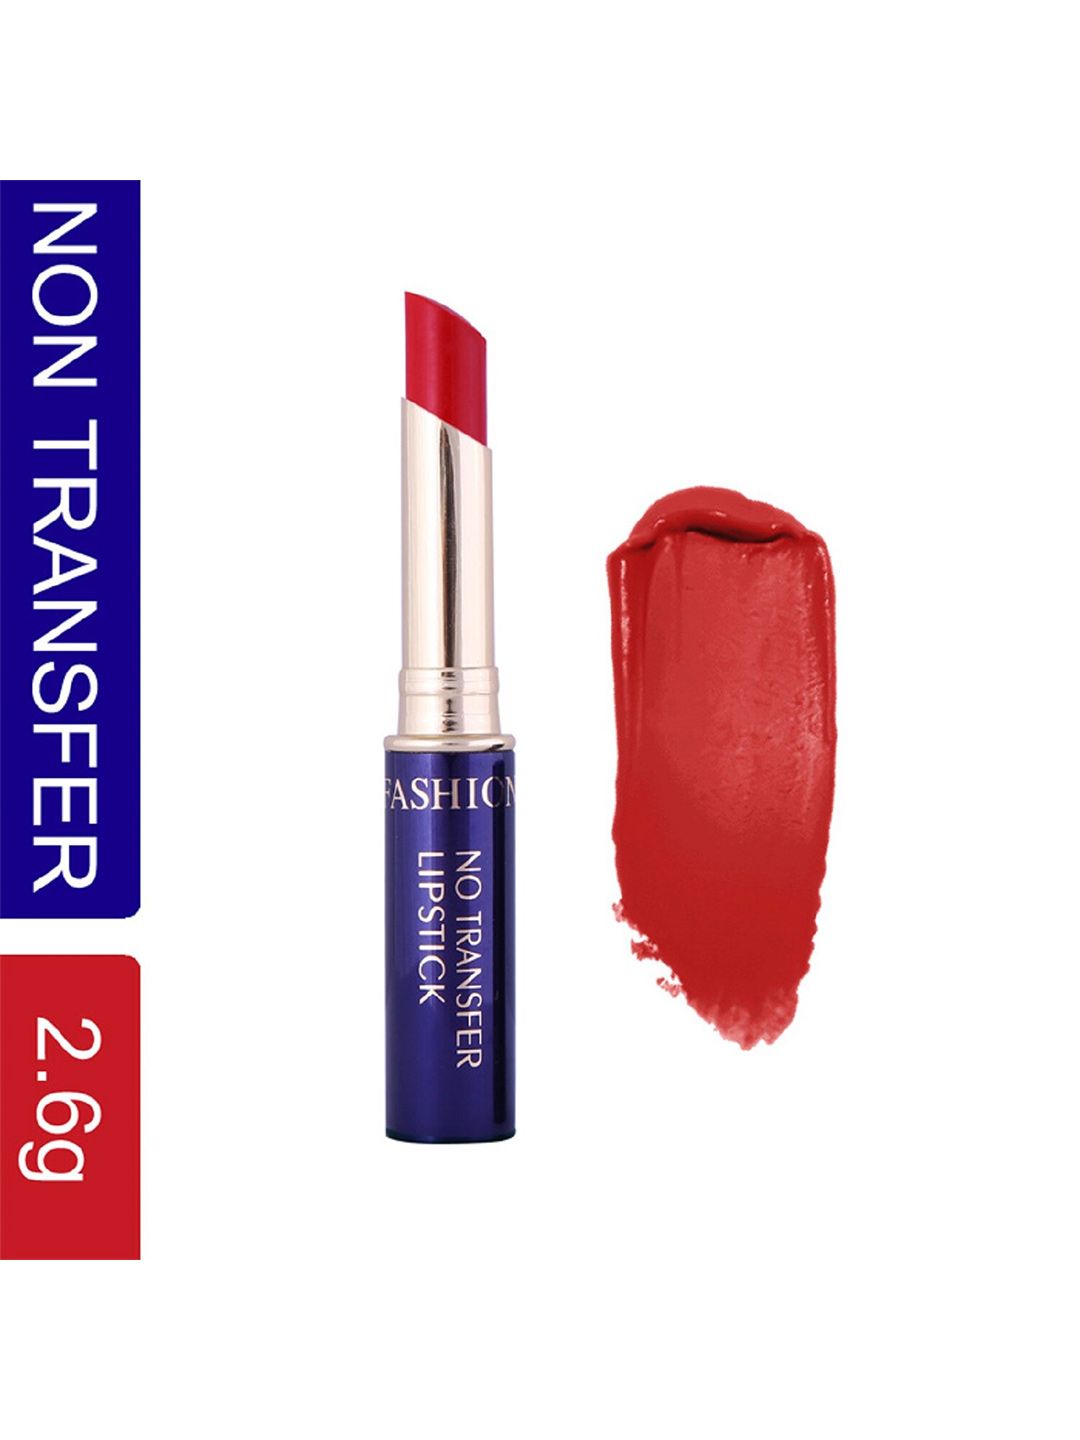 Fashion Colour No Transfer Matte Waterproof Lipstick 2.6 g - Spicy Ruby 62 Price in India